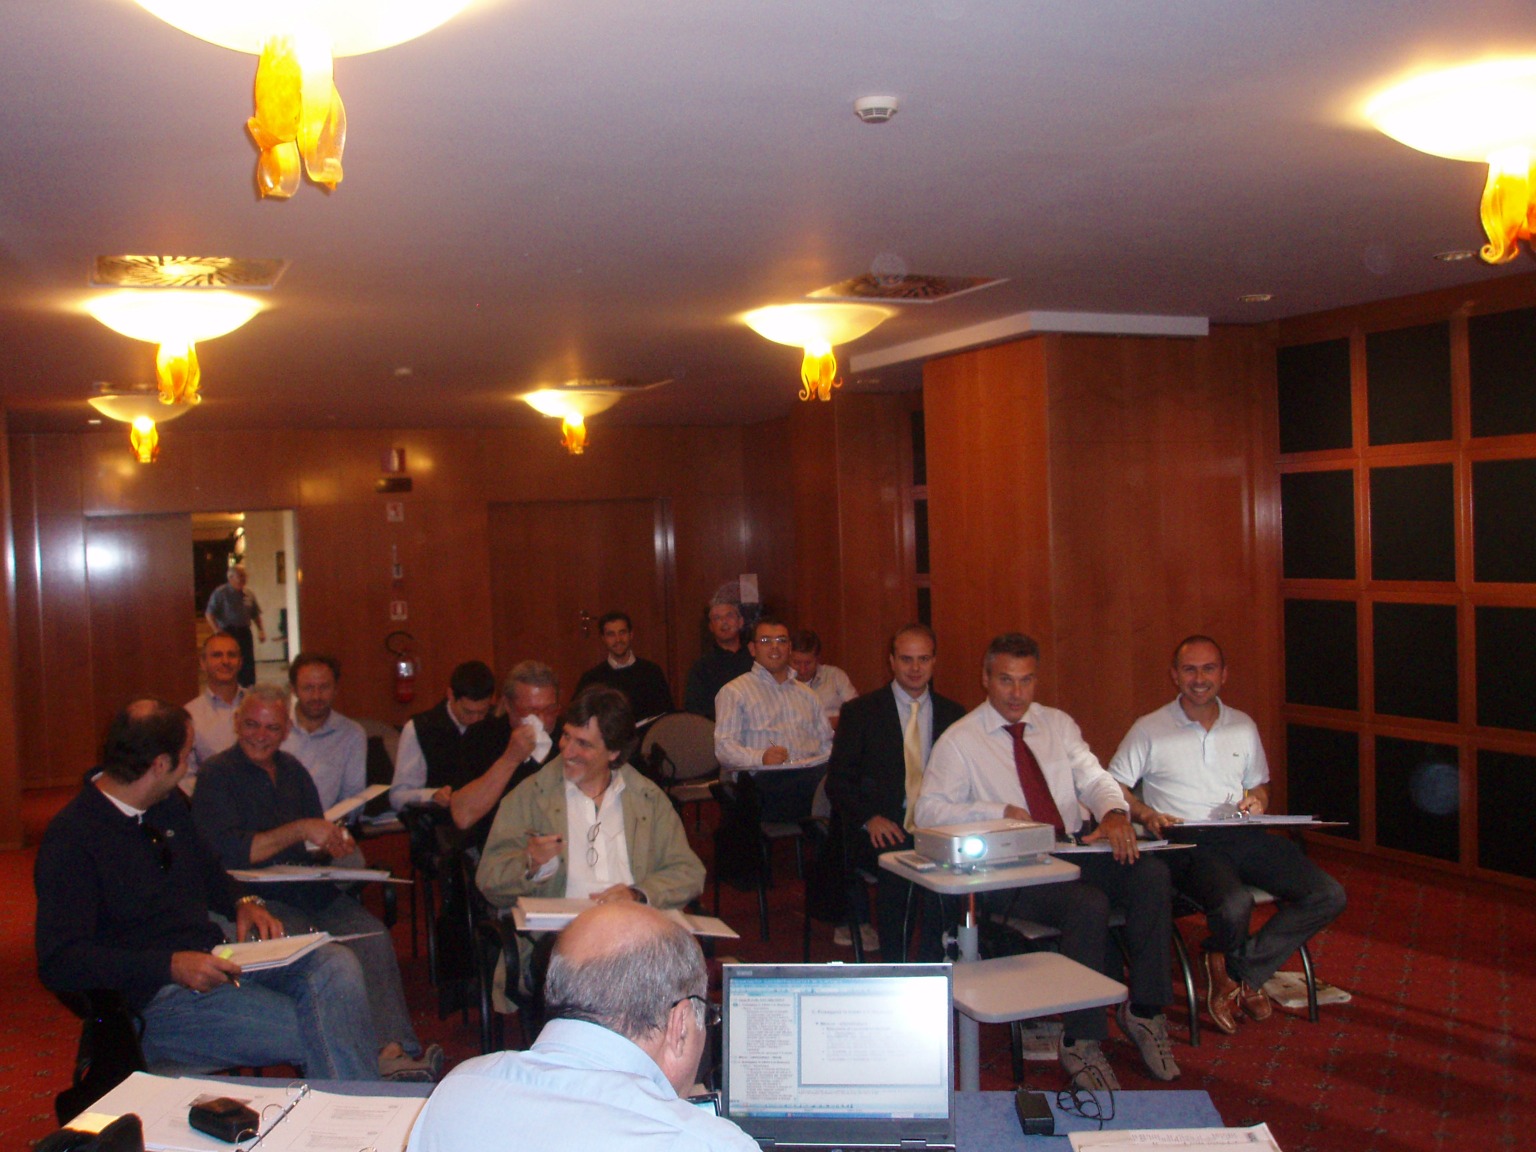 The first ASCS training course to be held in Rome, Italy, in 2007